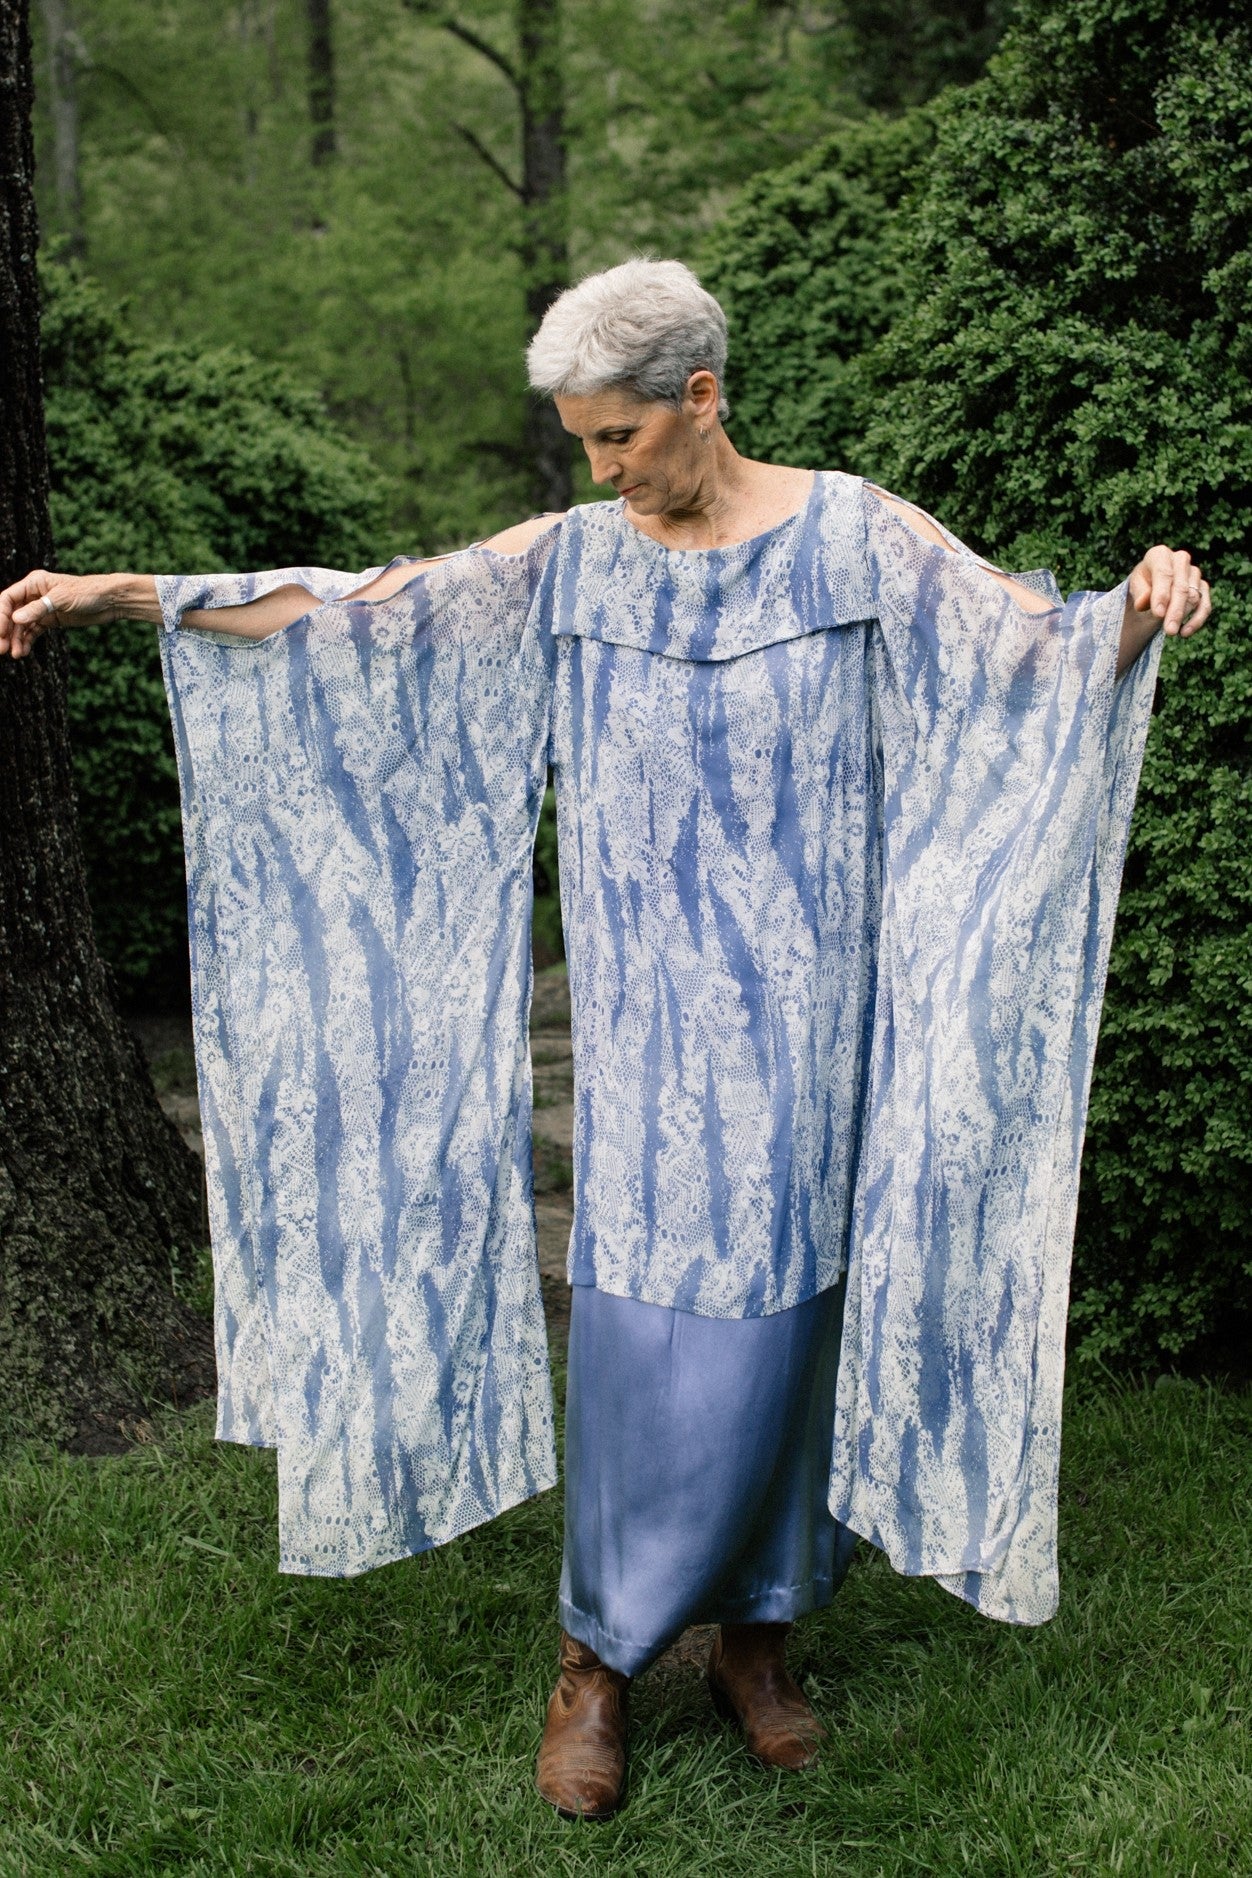 Older White woman with grey short hair standing surrounded by greenery looking down, wearing the #266 Greek Island Dress Tunic, extending both arms out showing the free-floating sleeve panels.